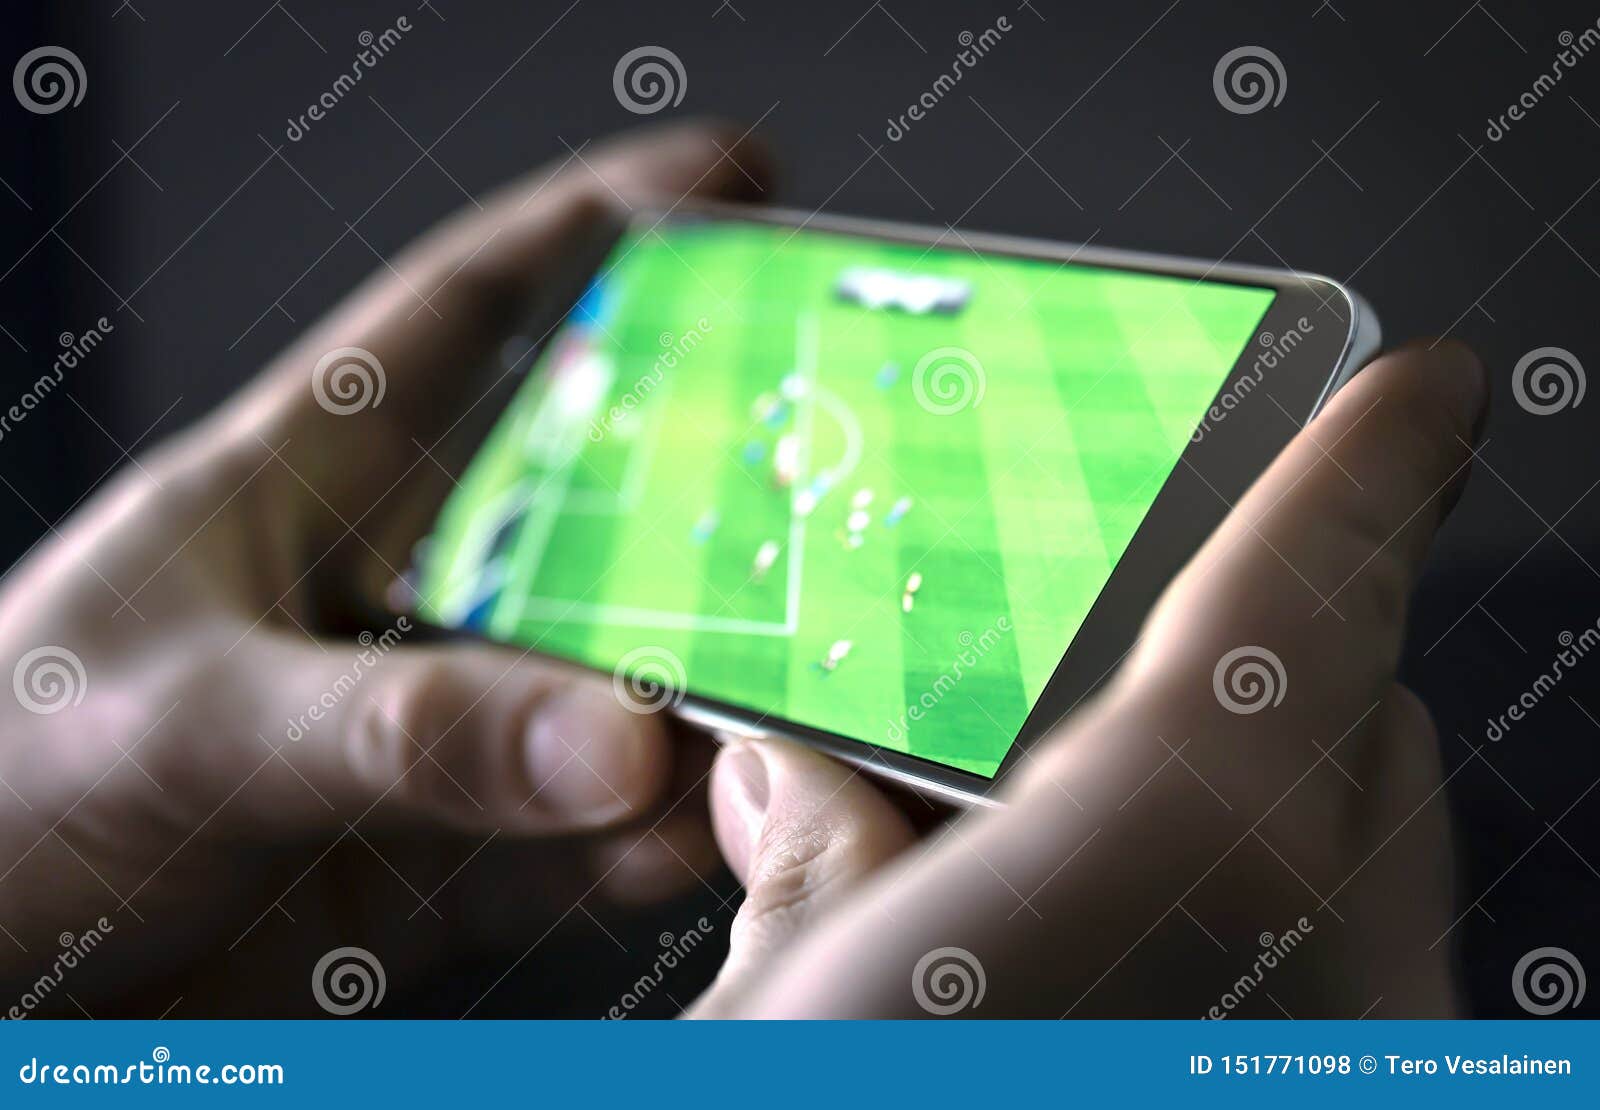 Watching Football and Sport Stream with Mobile Phone